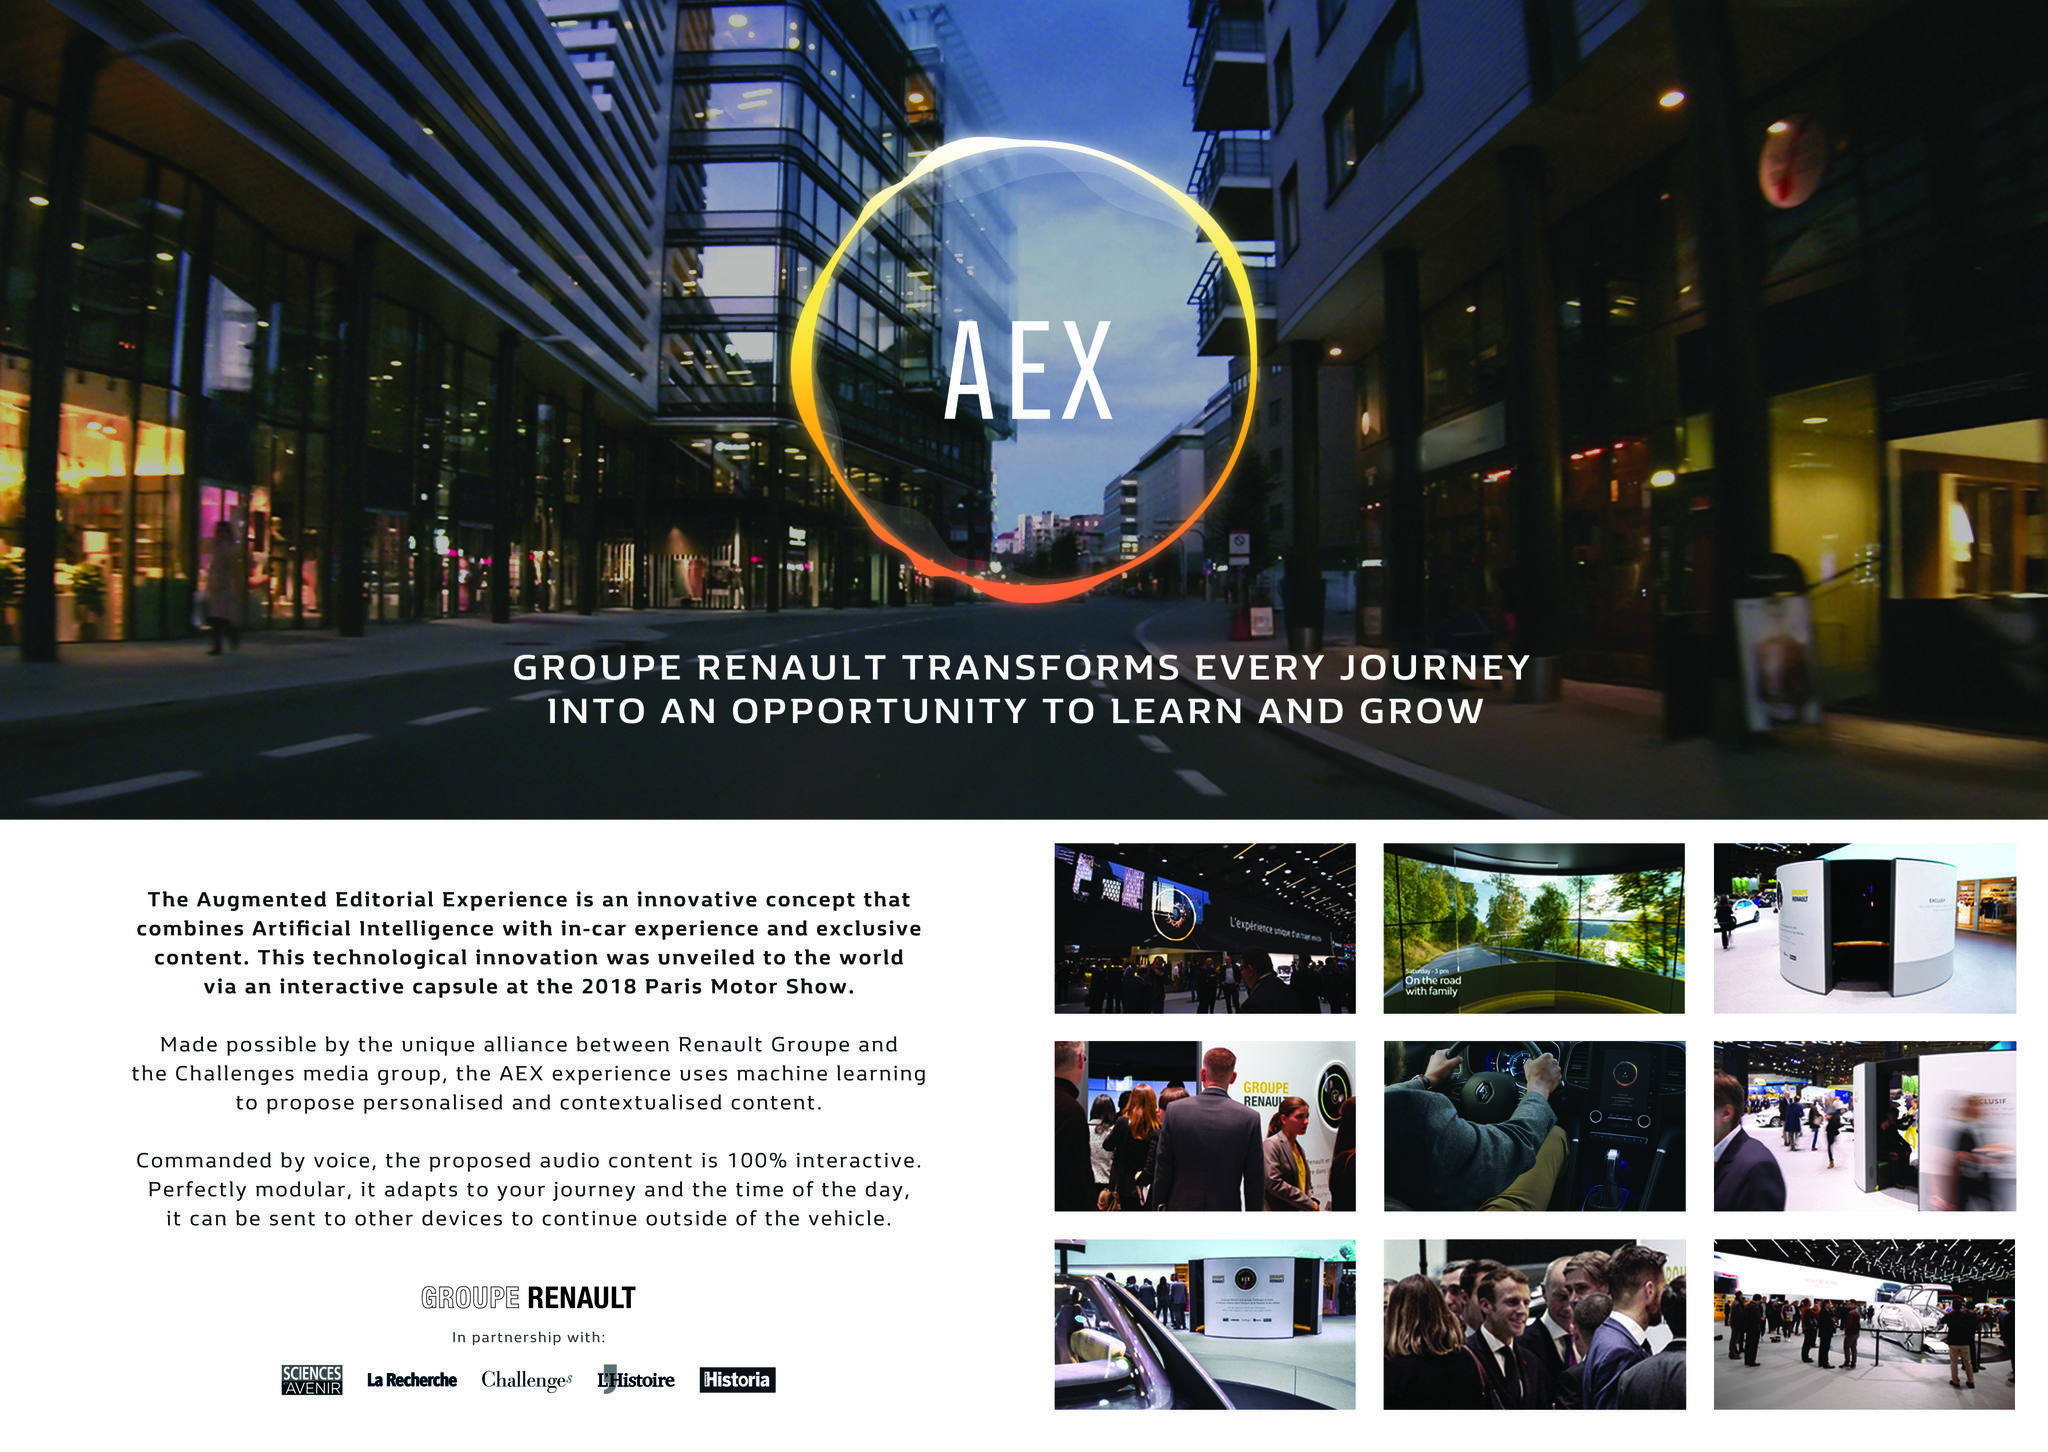 AEX - Augmented Editorial Experience